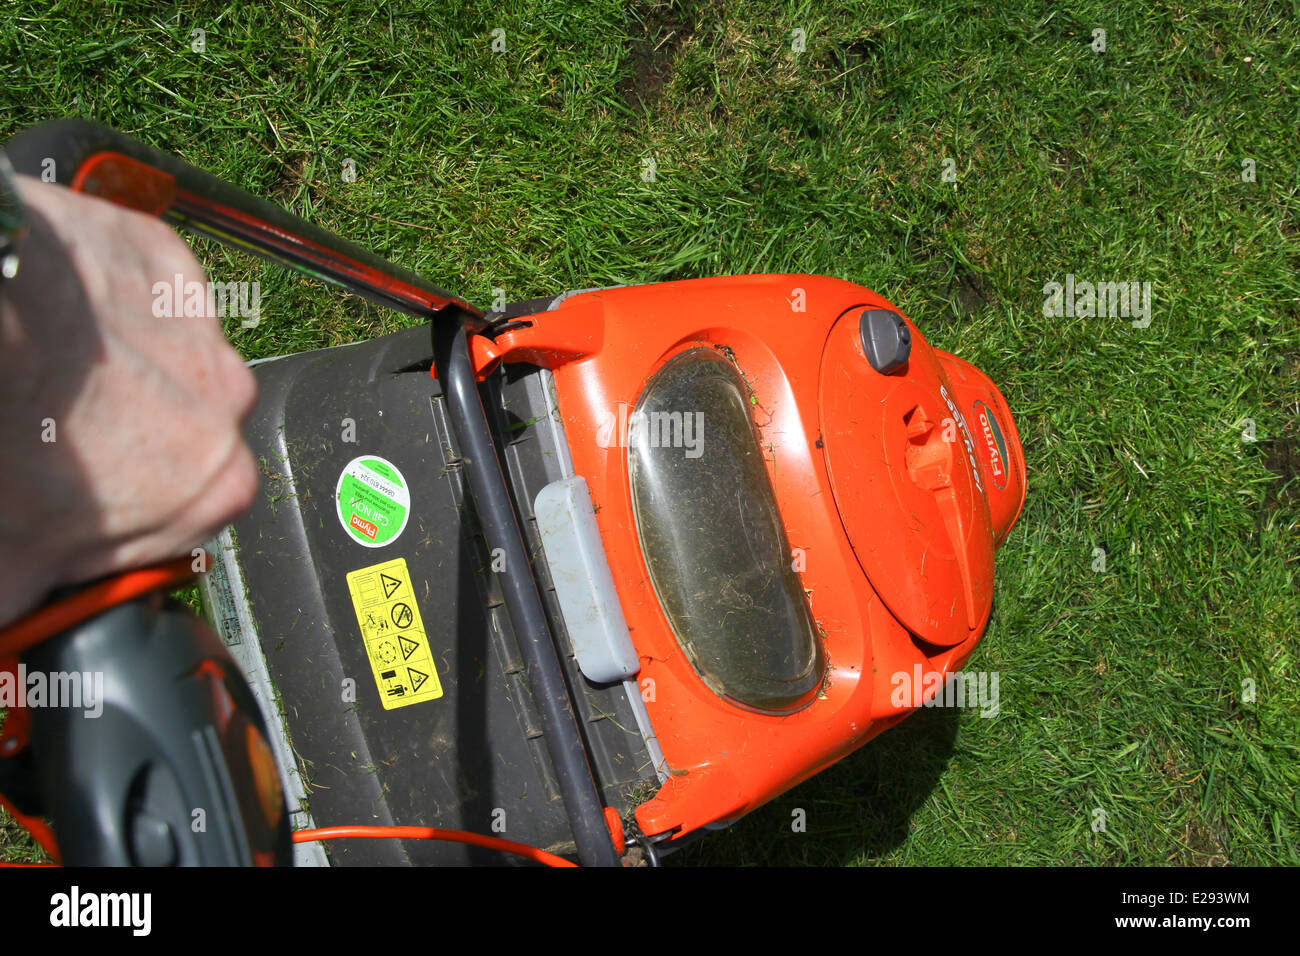 Mowing grass in garden with Flymo hover lawn mower Stock Photo